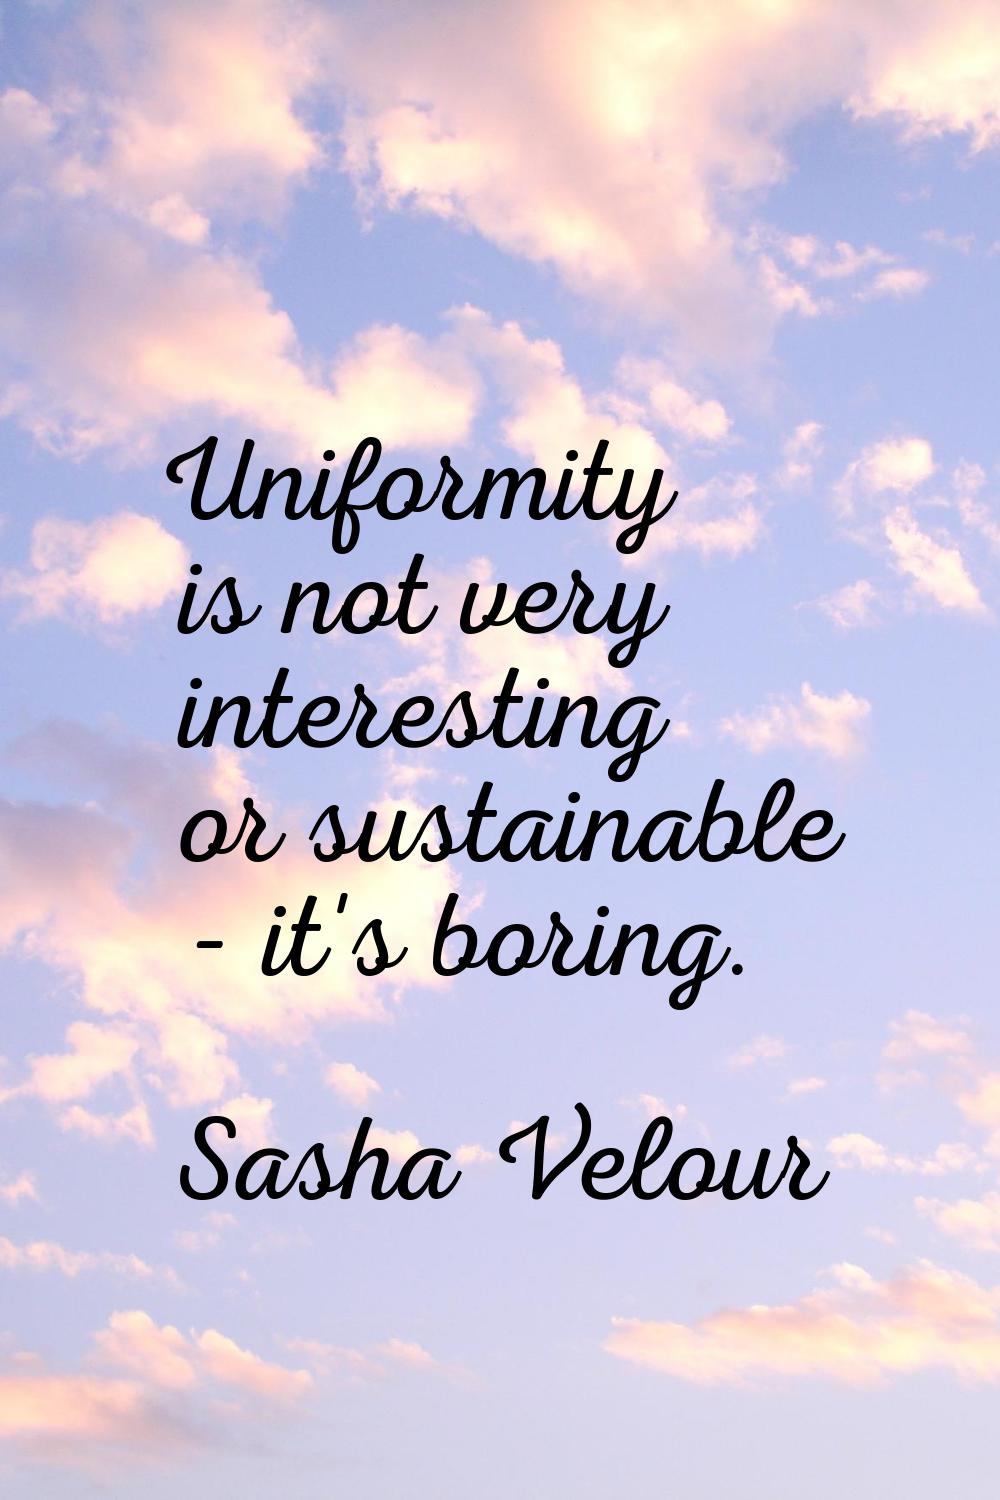 Uniformity is not very interesting or sustainable - it's boring.